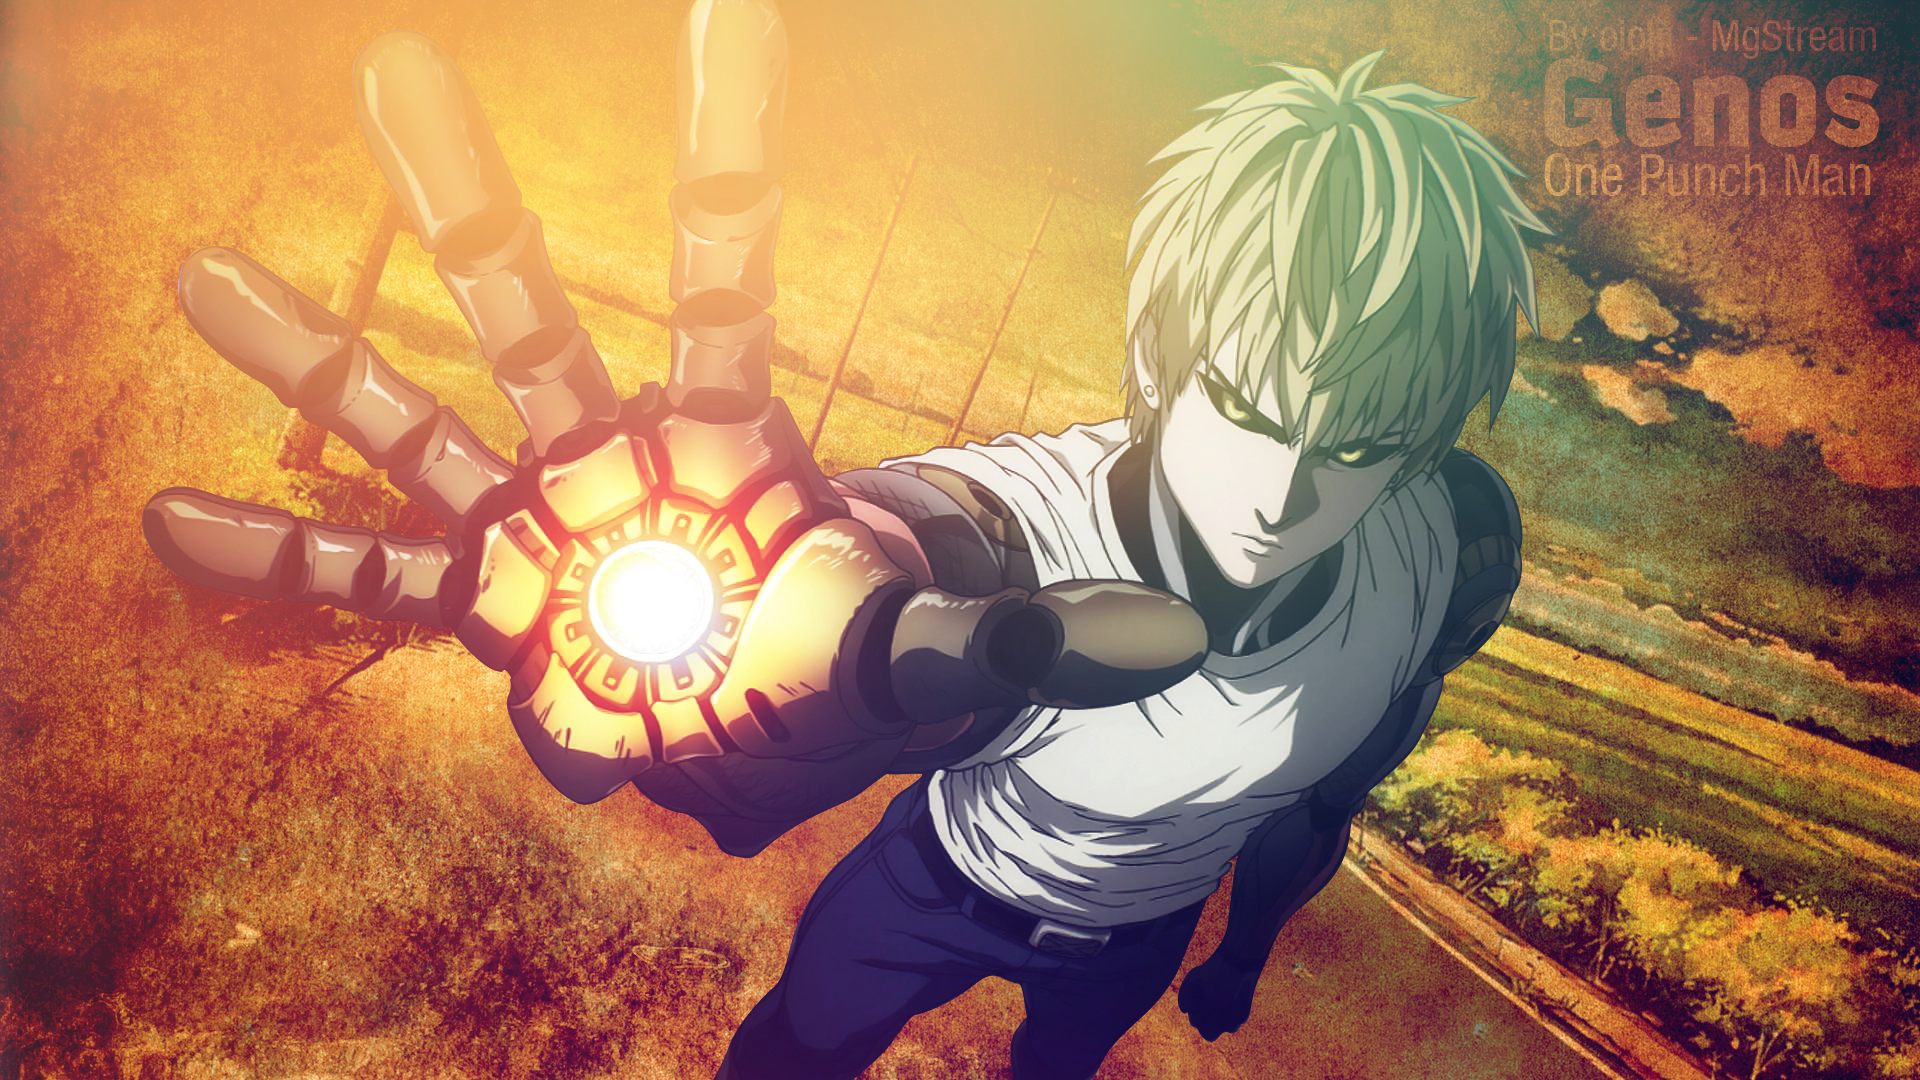 Anime One Punch Man Genos (One Punch Man) Wallpaper. One Punch Man, One Punch, Man Wallpaper